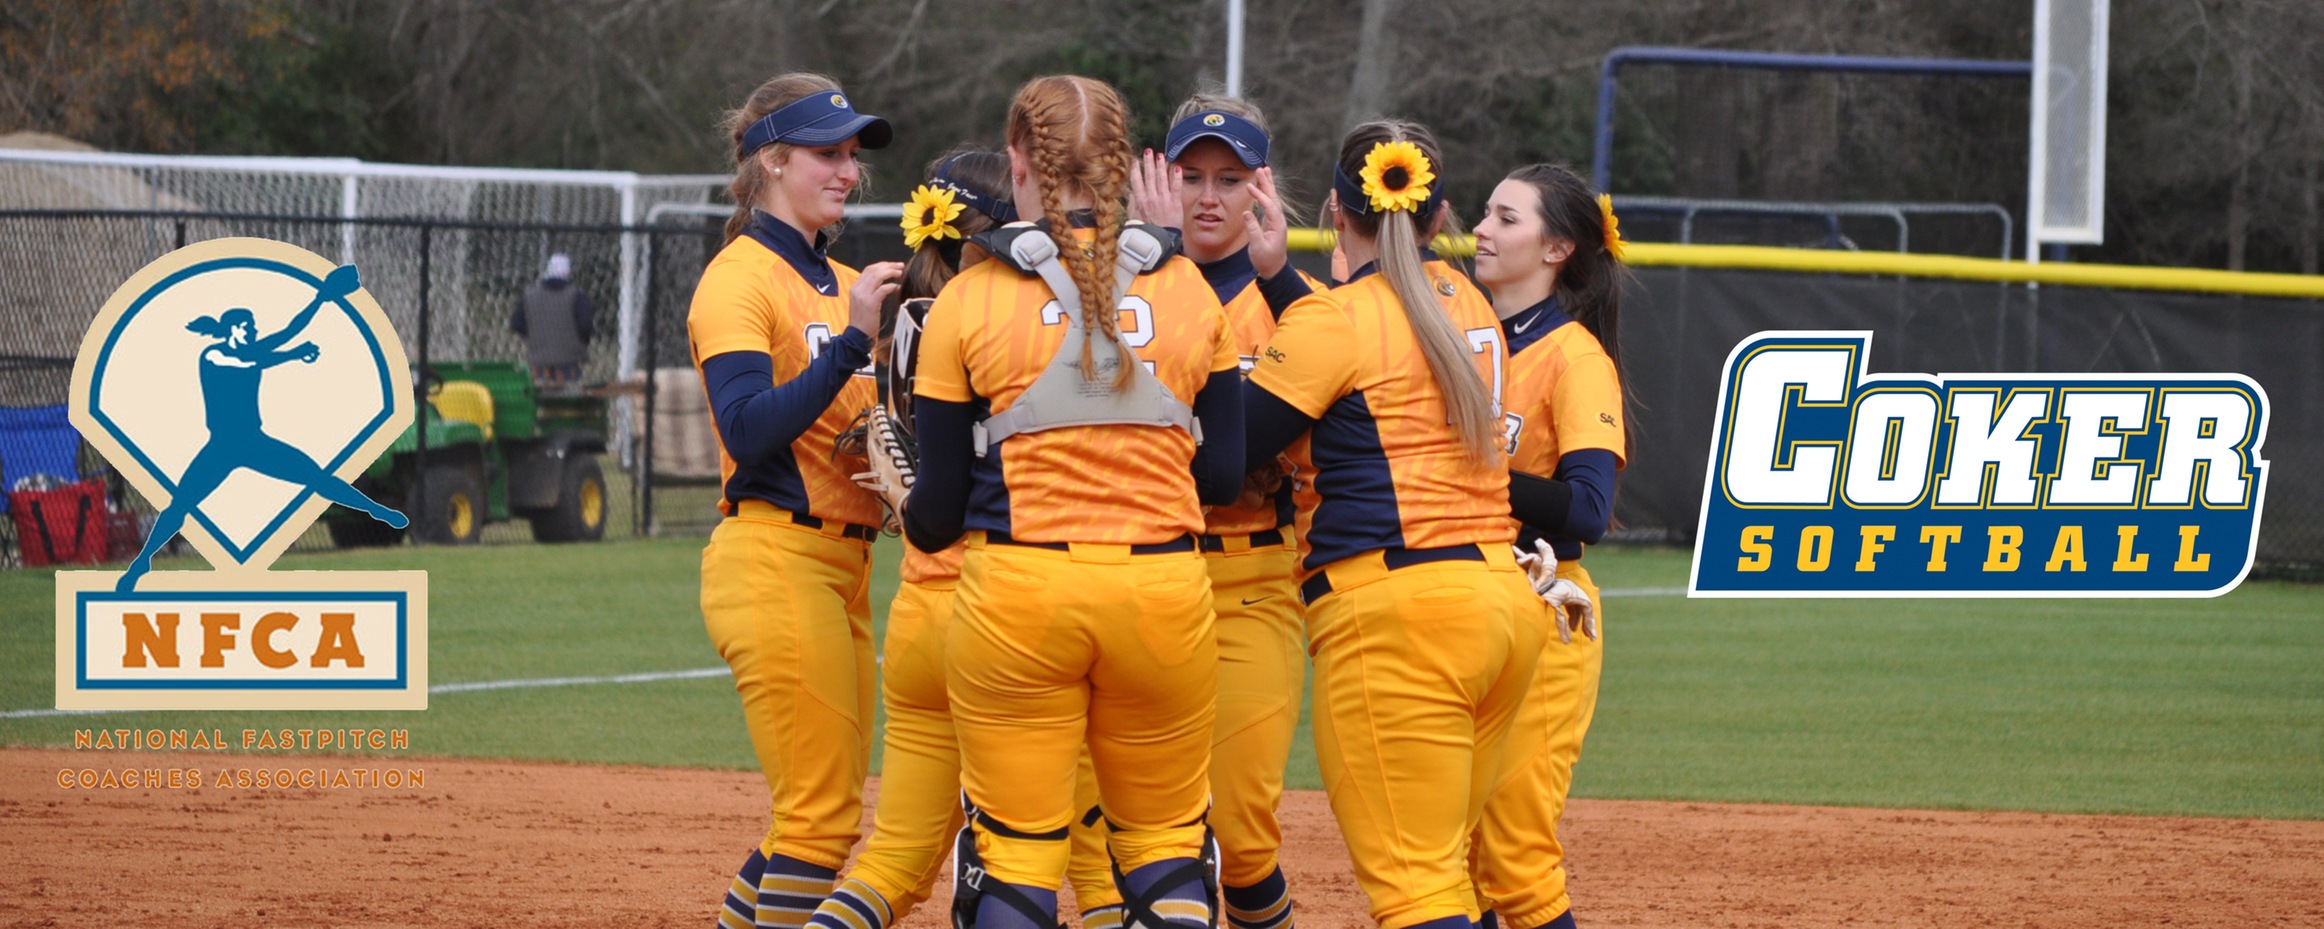 11 Coker Softball Players Recognized as 2018-19 NFCA Scholar-Athletes